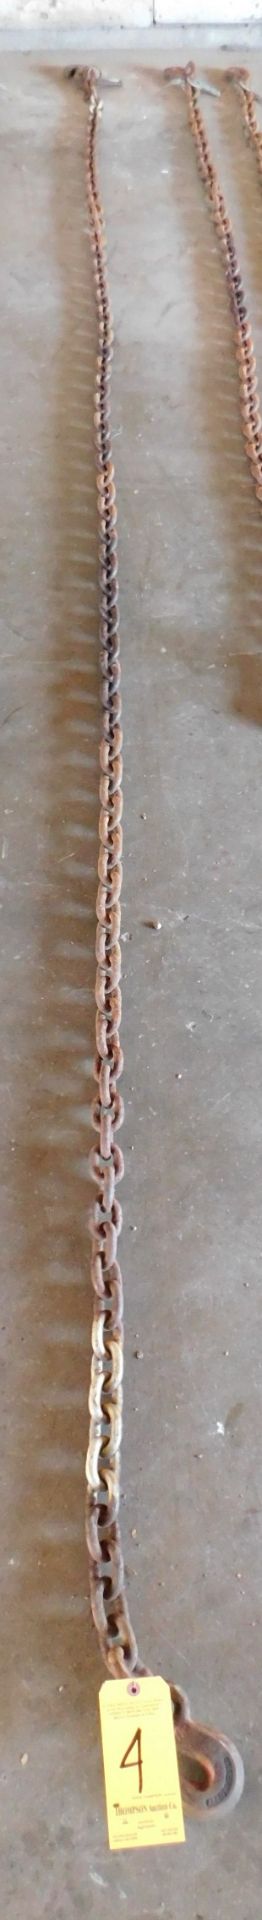 Chain, 2 Hook, 15ft. 3 inch Long,1/2 inch link, 11,250 lb. capacity